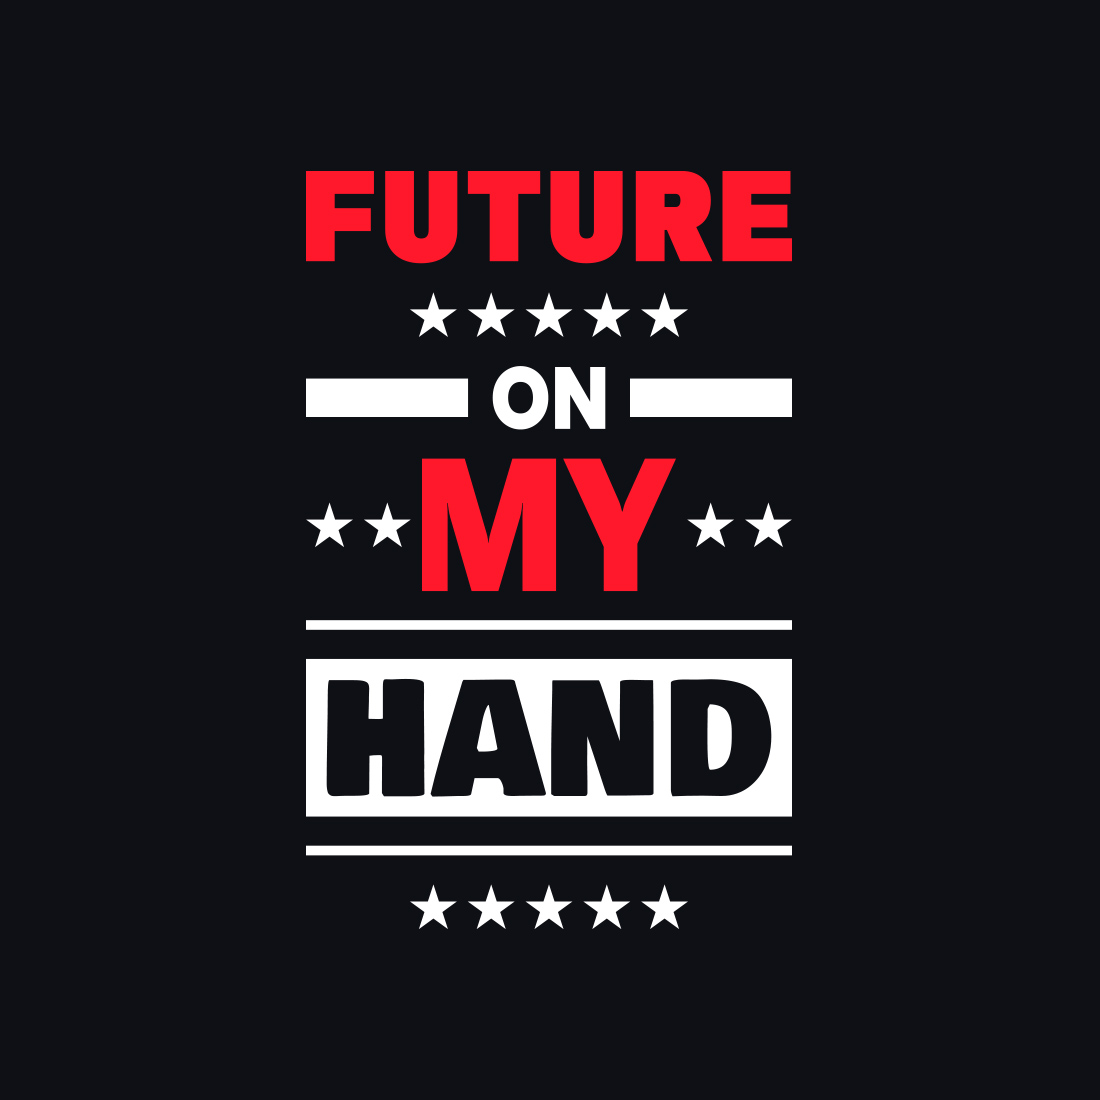 Image with colorful "future on my hand" lettering in red and white colors.